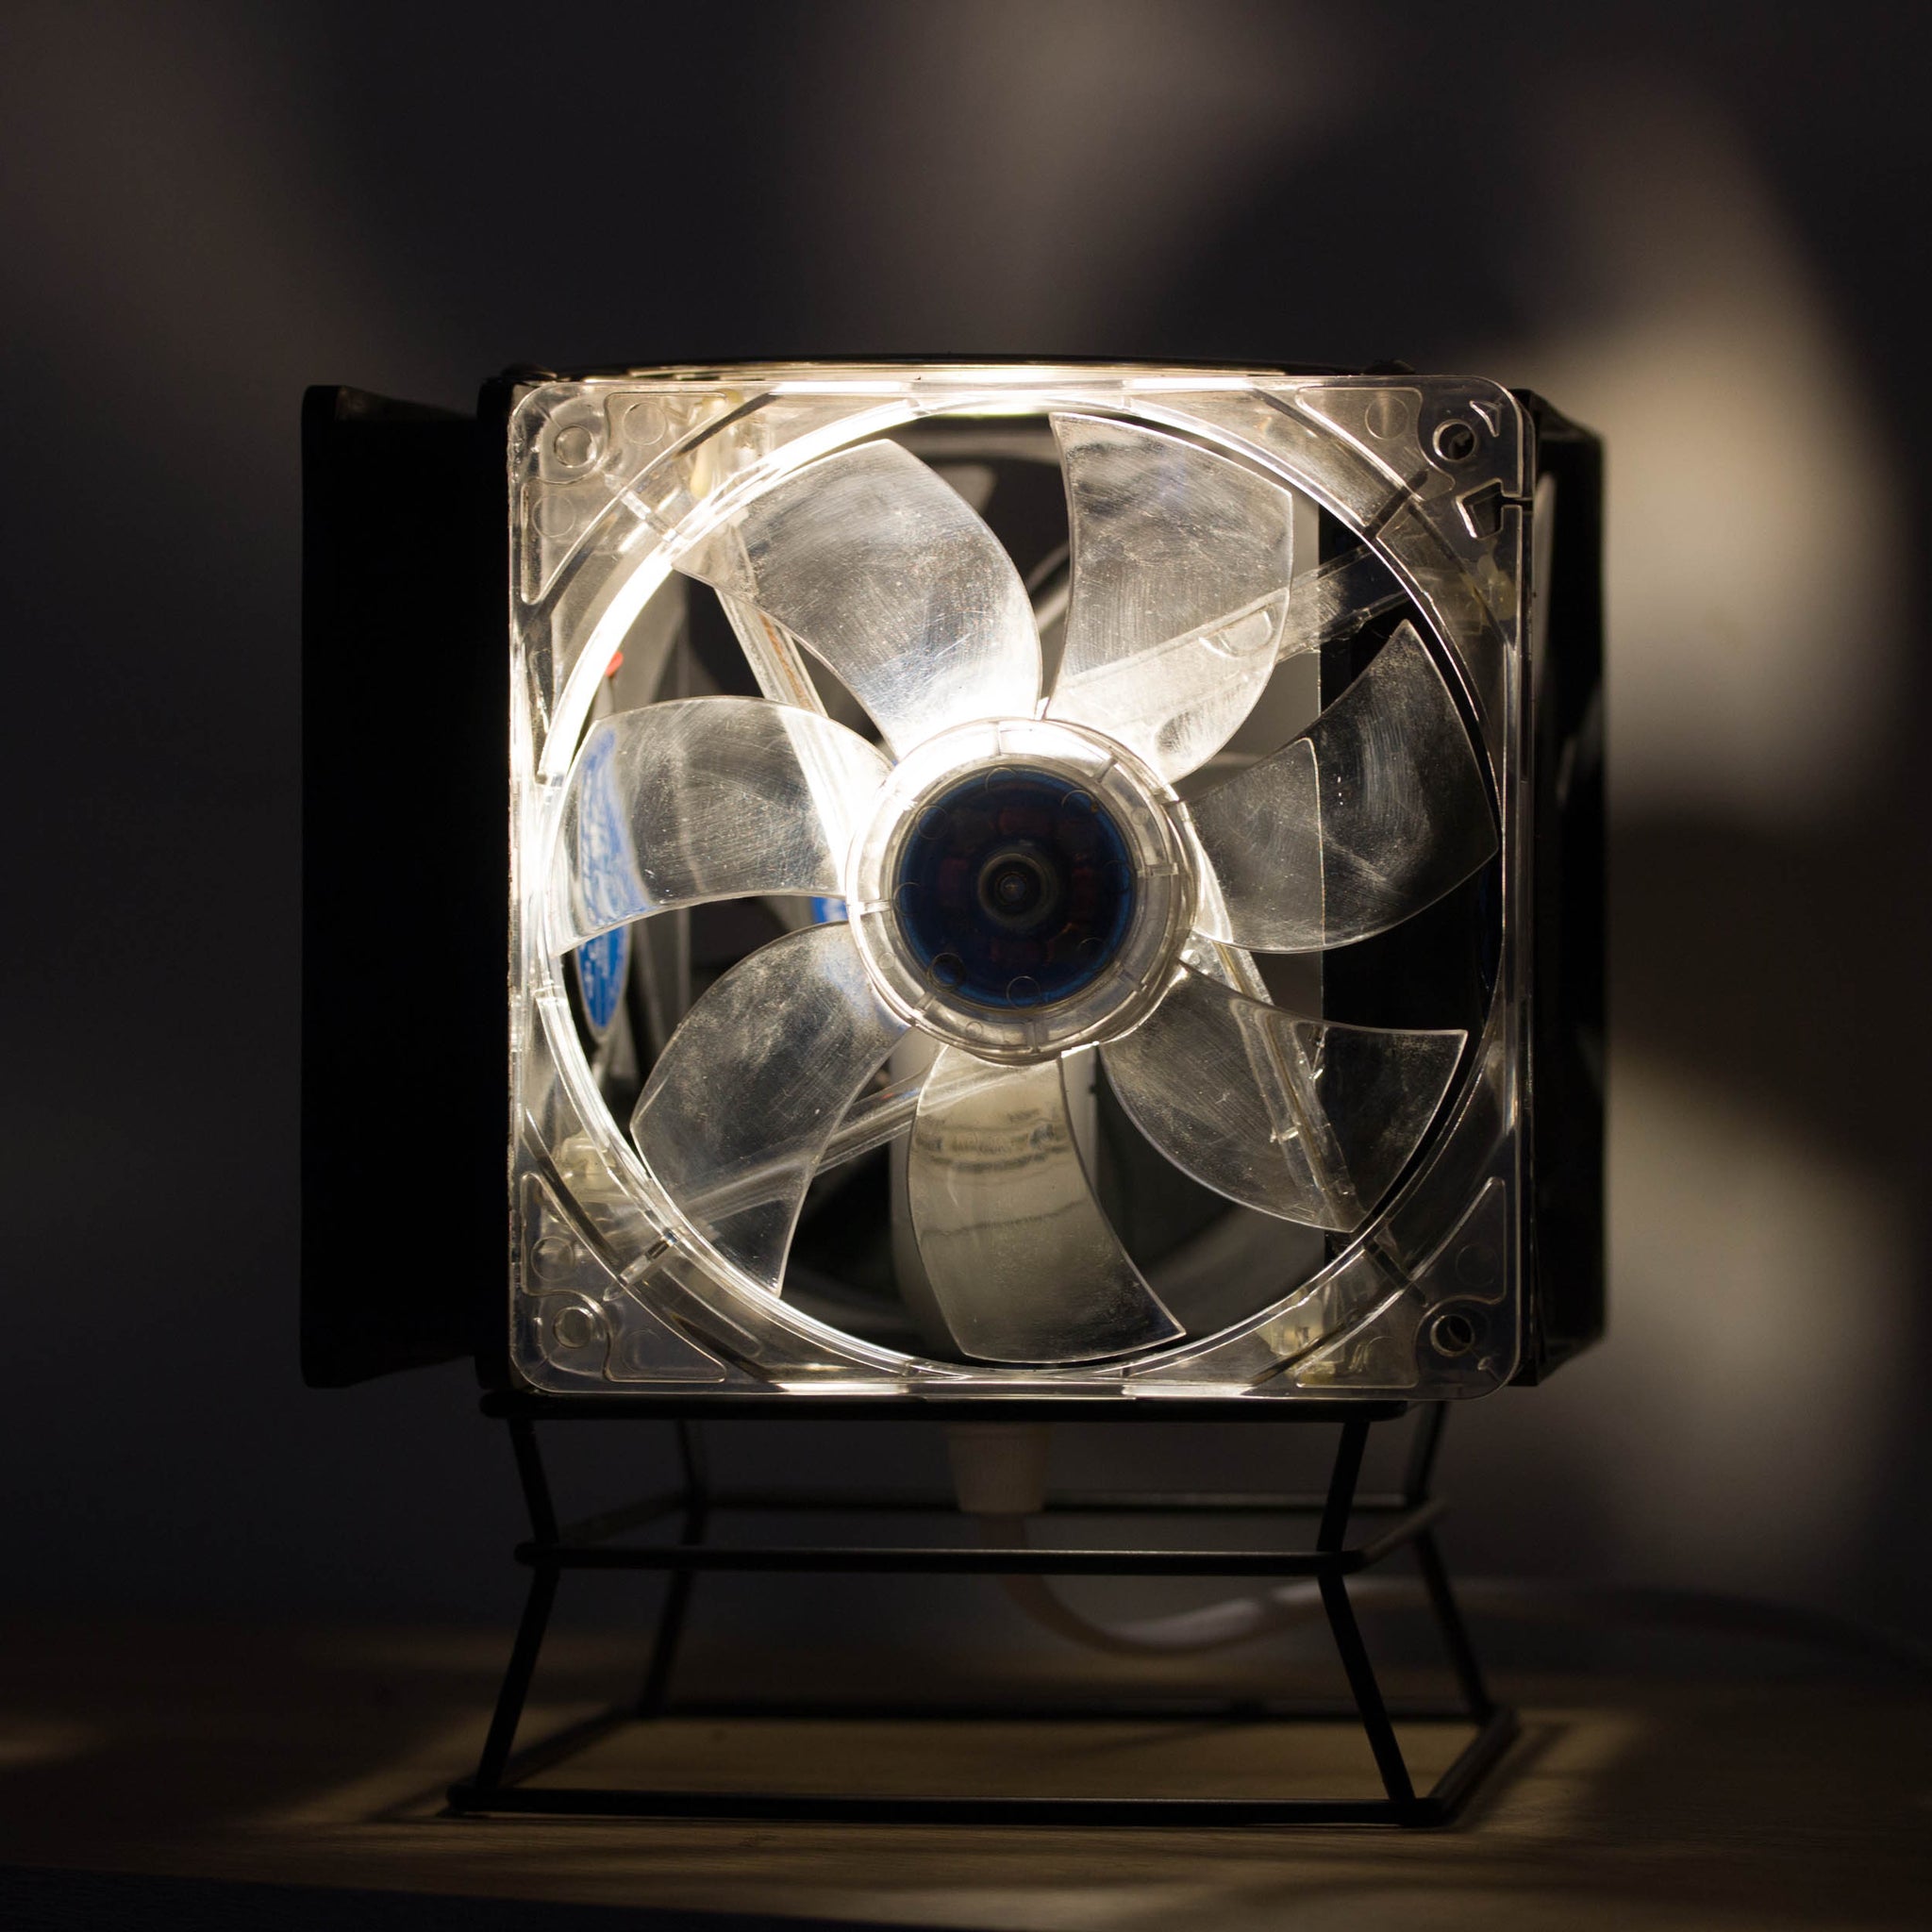 Table lamp made with recycled computer Cooling Fans